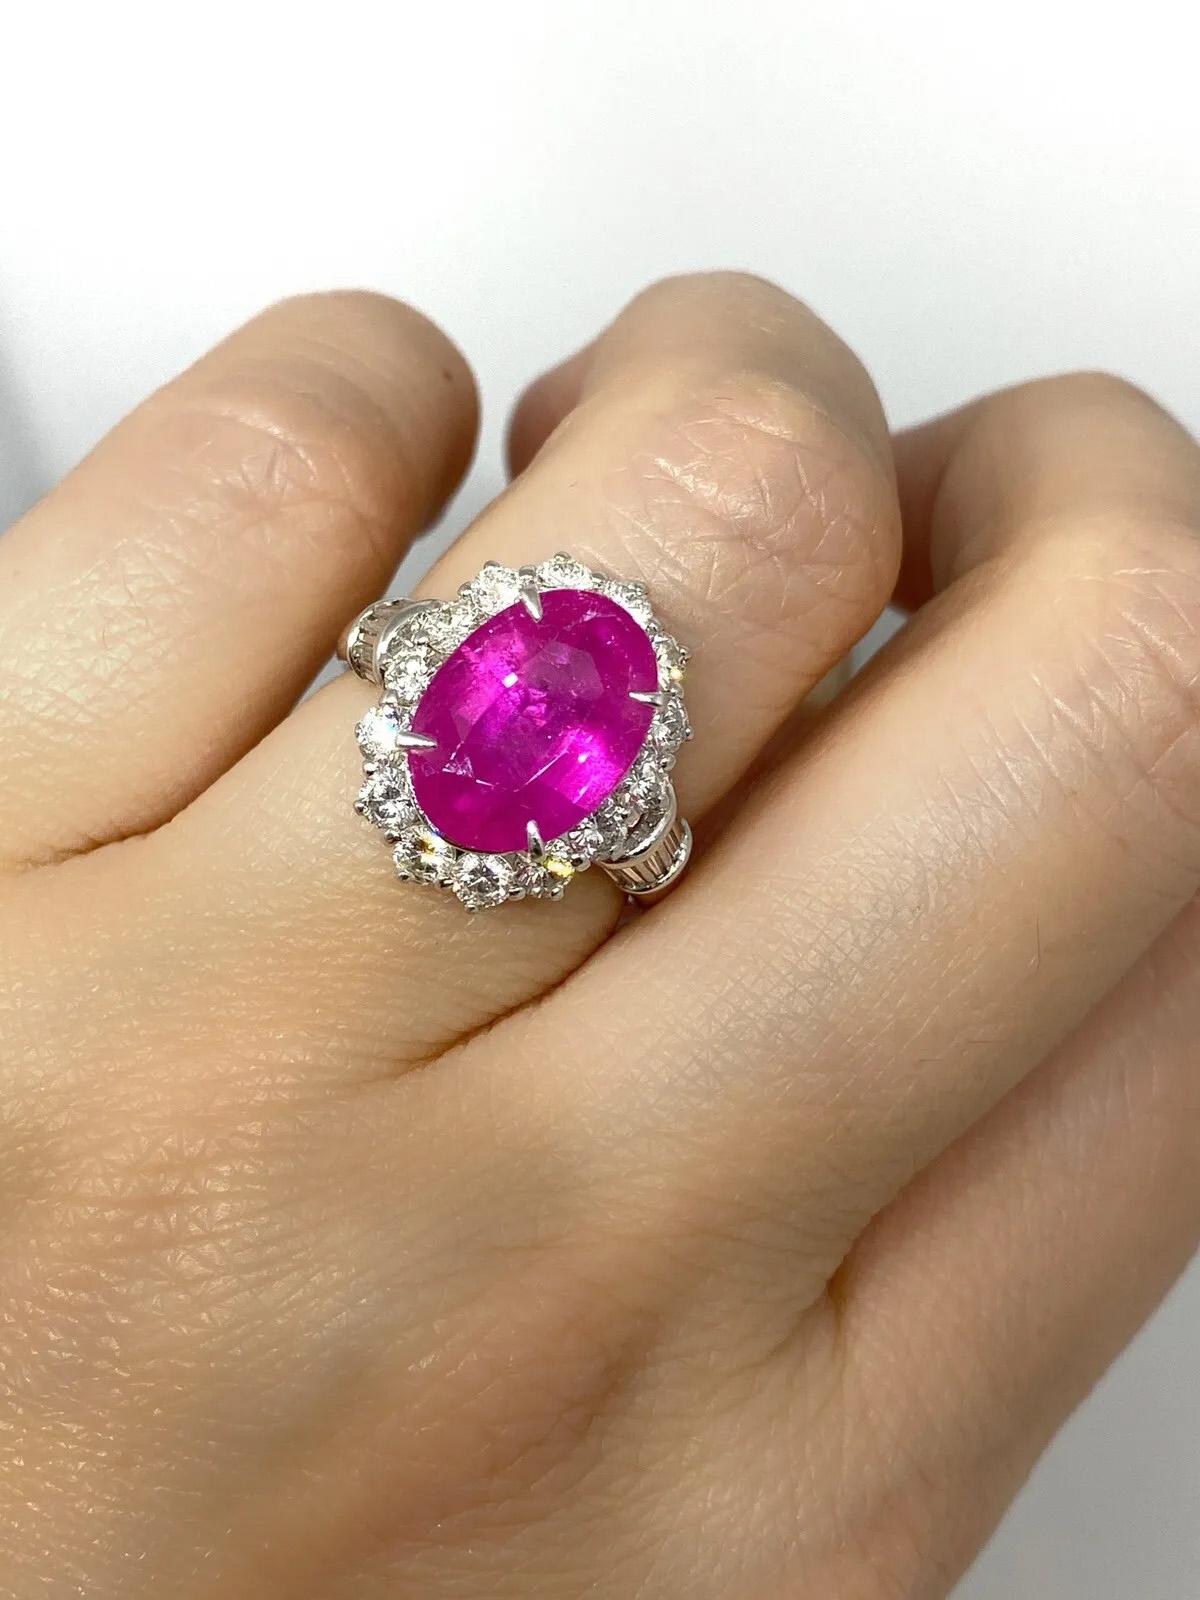 GIA Burma Heated Ruby 4.74 carat Oval in Diamond Platinum Ring

Ruby and Diamond Ring features a large Oval Purplish Red Ruby surrounded by 14 Round Brilliant and 10 Baguette Diamonds set in Platinum.

The Ruby originates from Burma(Myanmar) and has